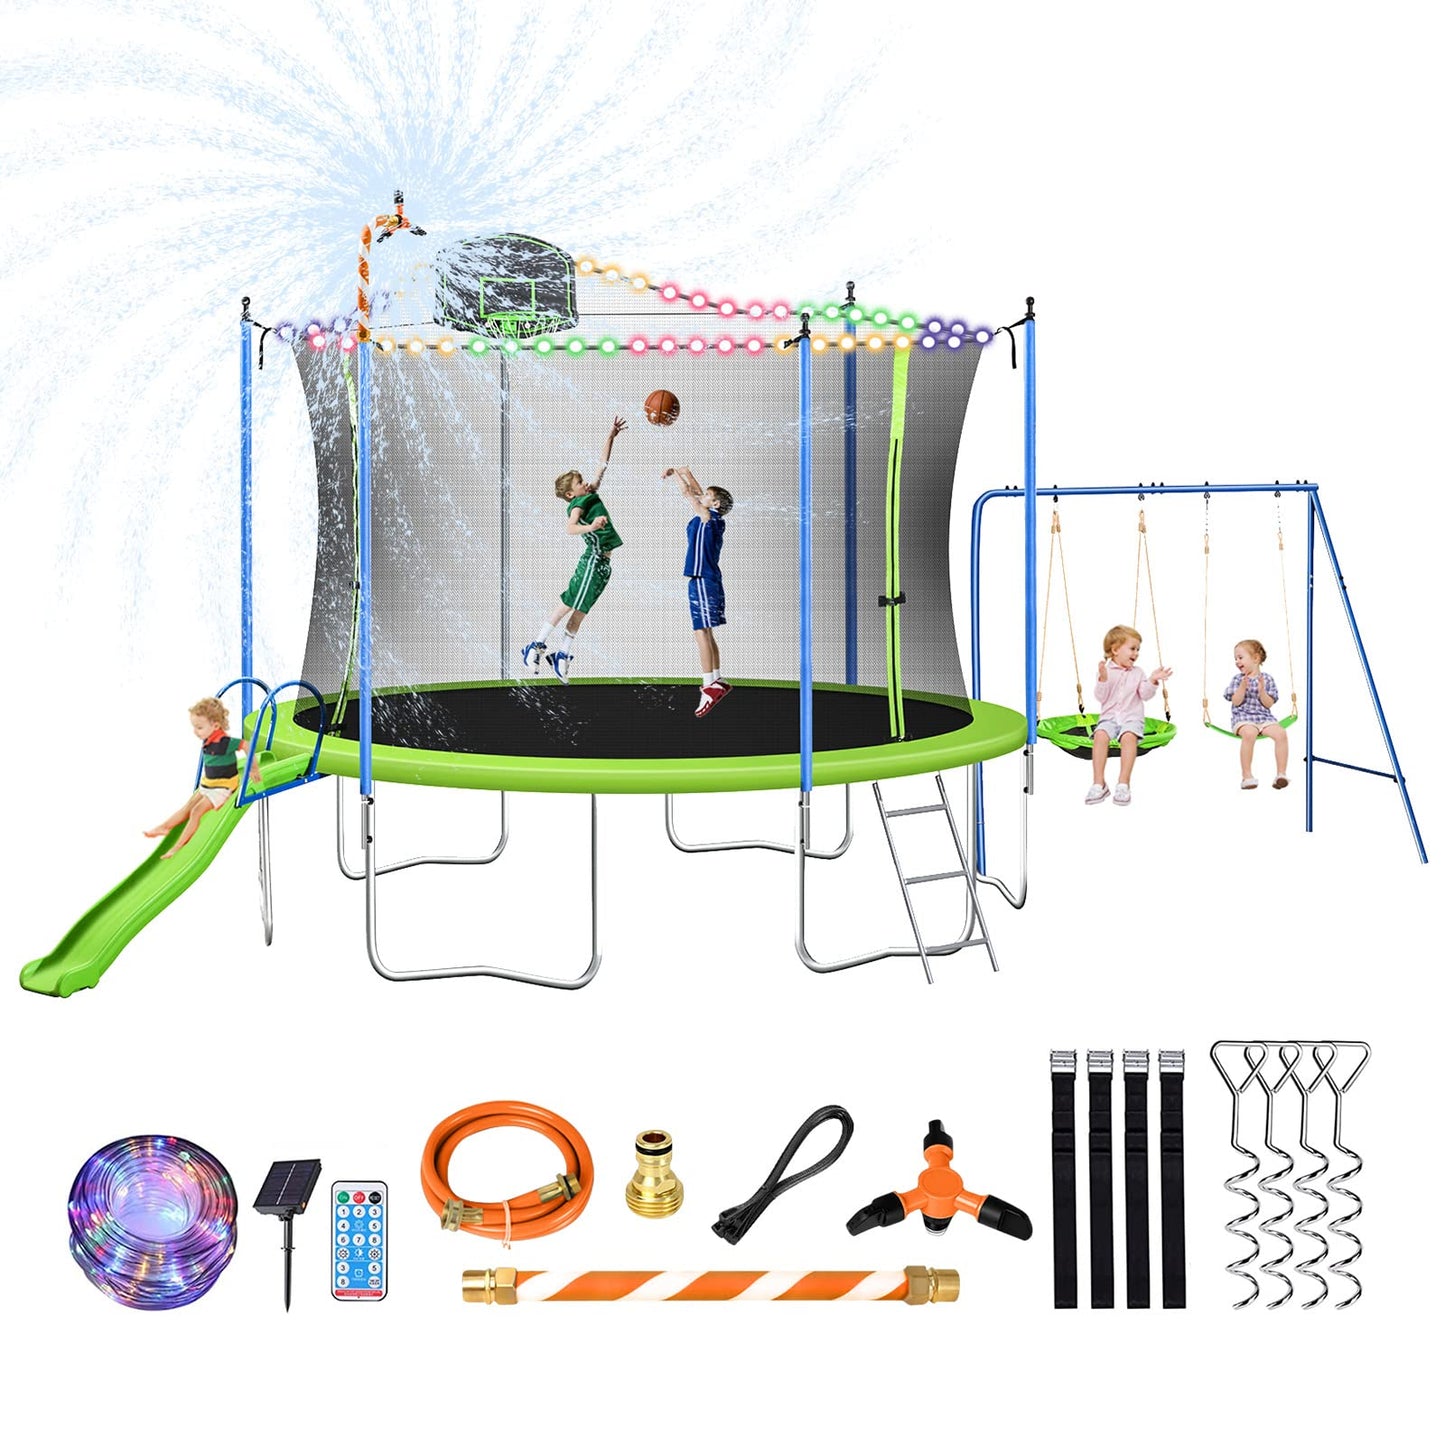 Lyromix 12 14FT Trampoline with Slide and Swings, ASTM Approved Large Recreational Trampoline with Basketball Hoop and Ladder,Outdoor Backyard Trampoline with Net, Capacity for 5-7 Kids and Adults